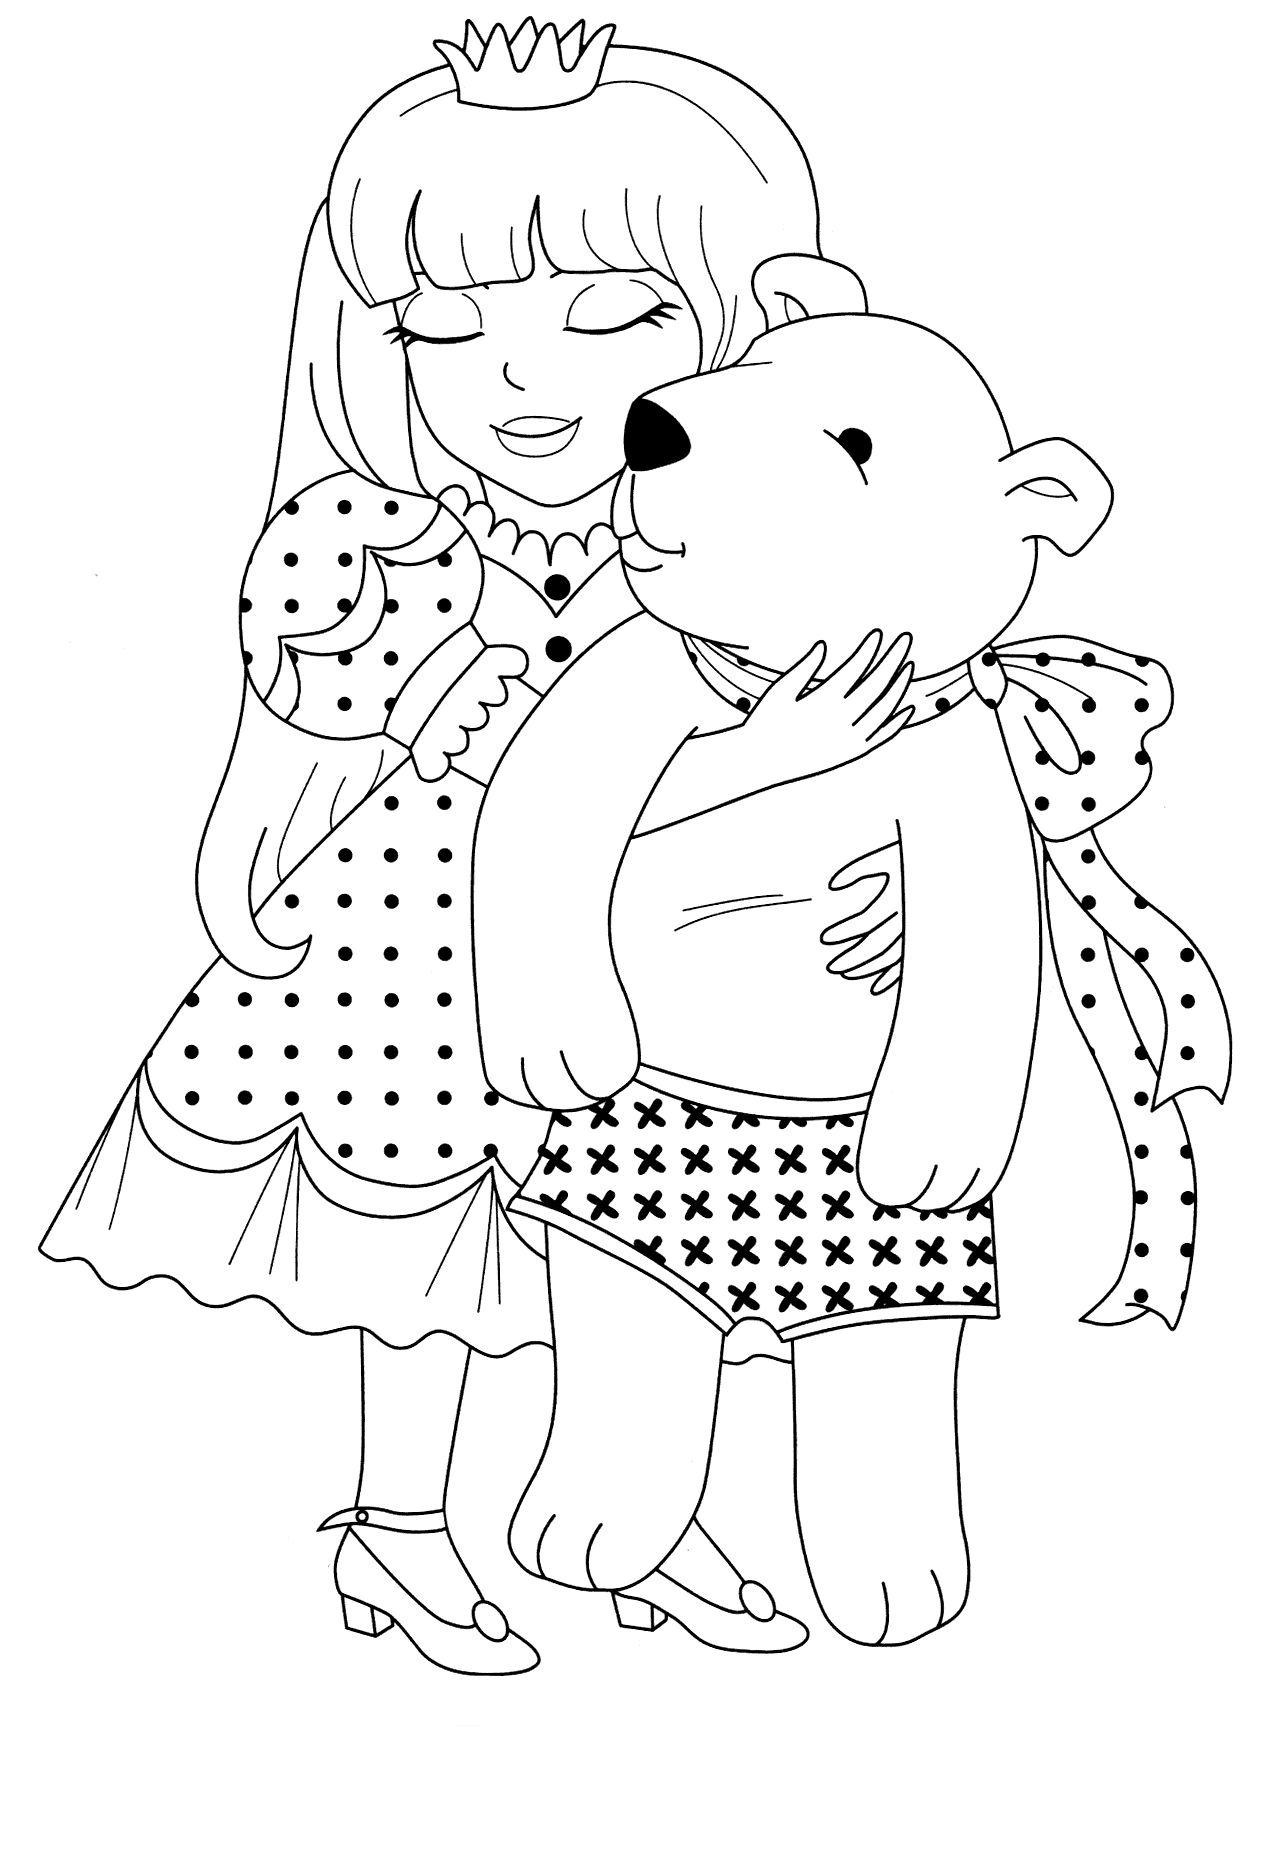 785 Animal Julia Coloring Pages with disney character